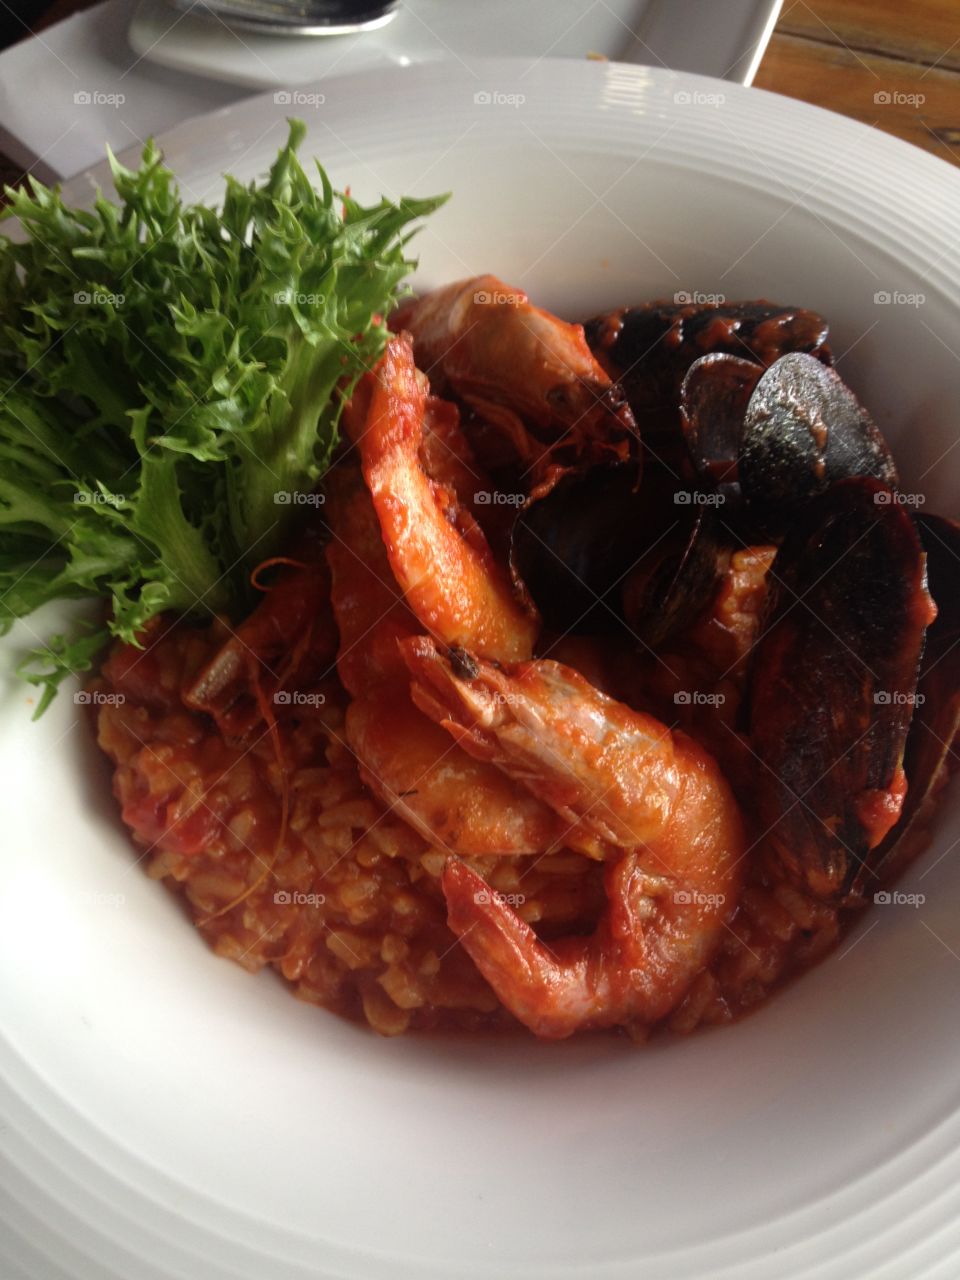 Seafood risotto for brunch @ Le Gardenz Cafe - RM28++